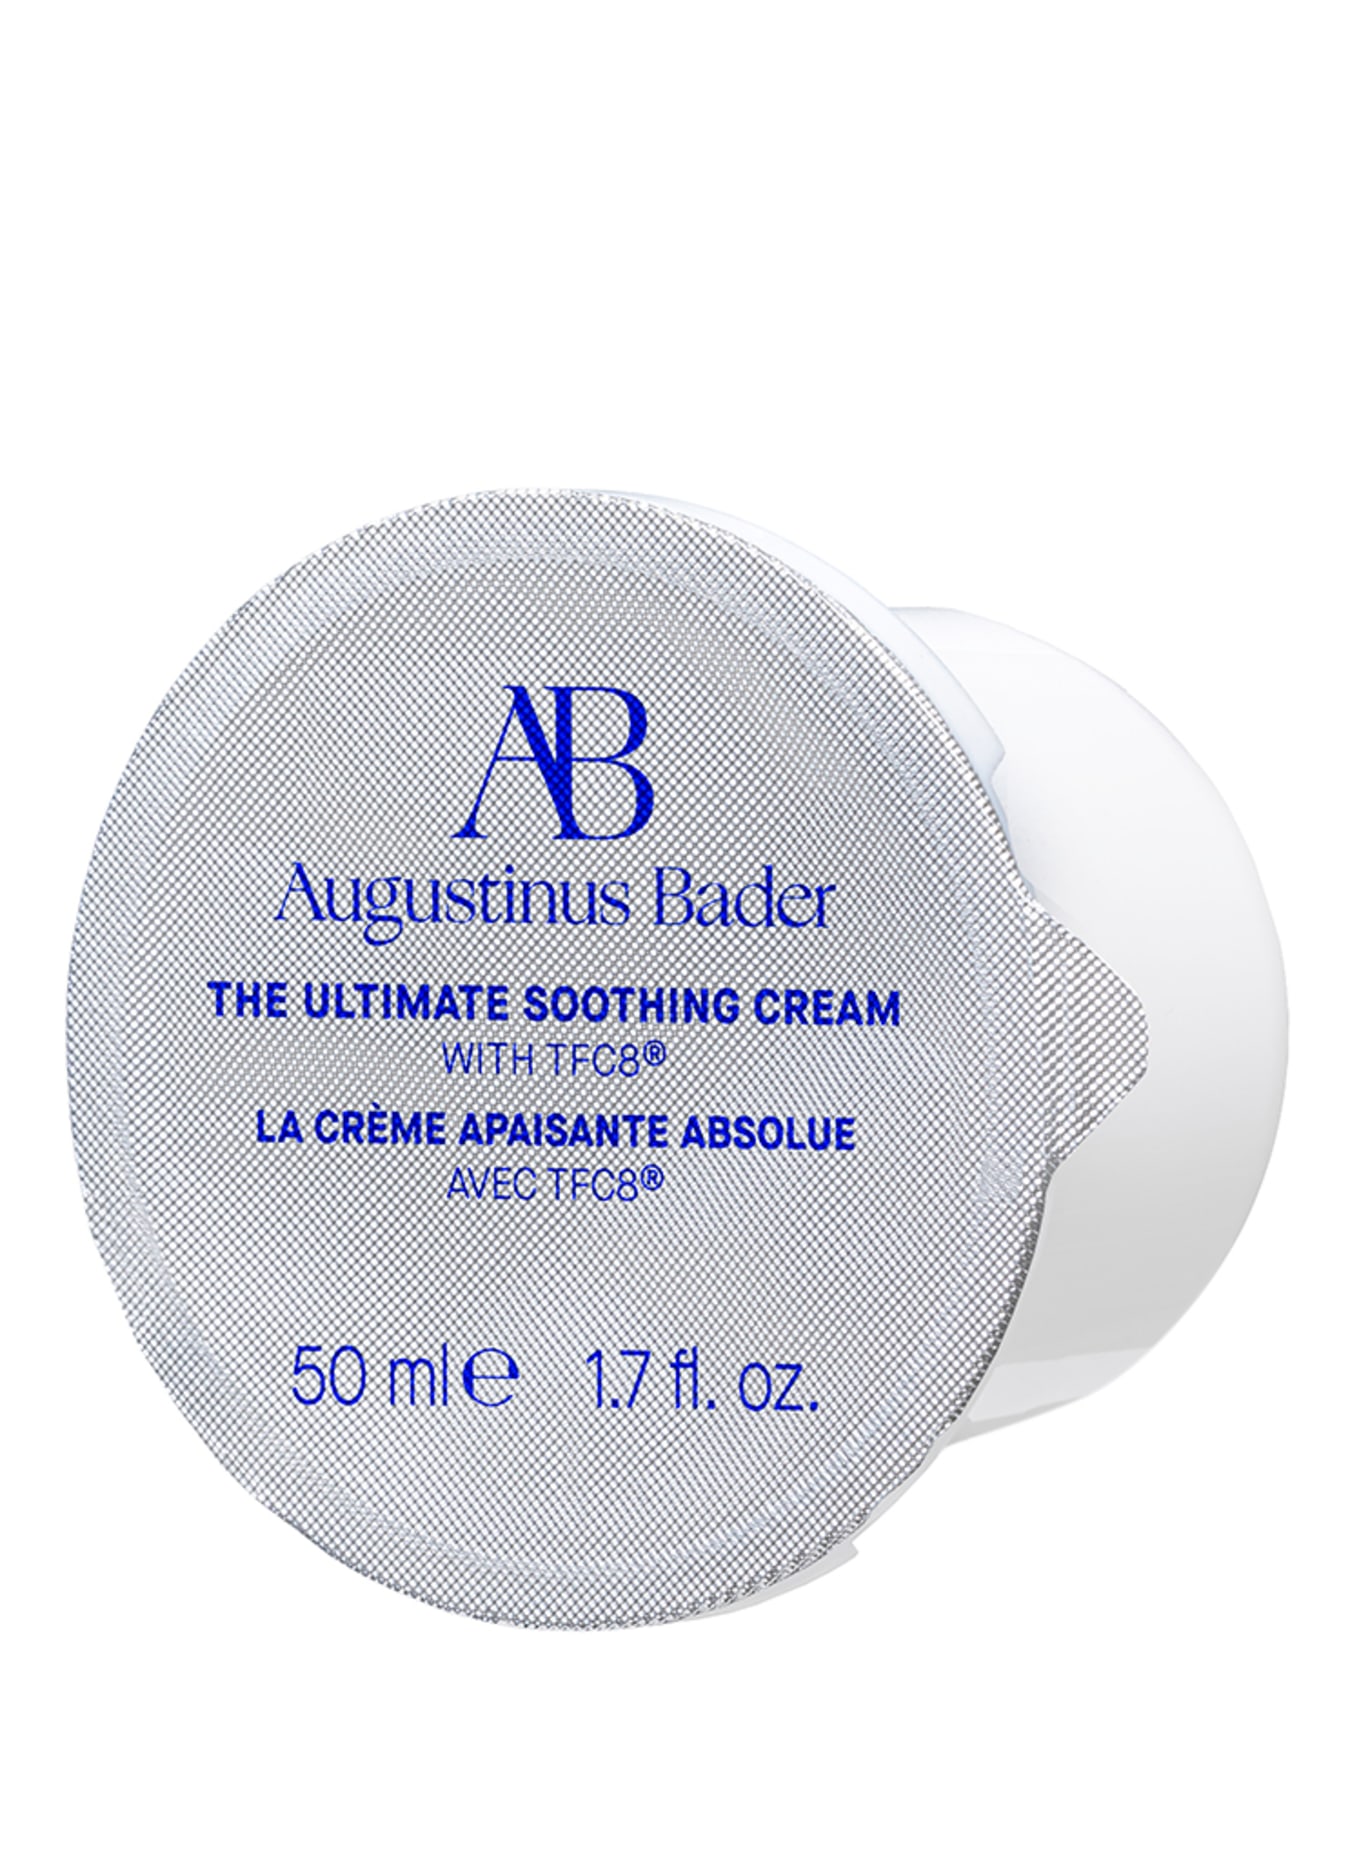 Augustinus Bader THE ULTIMATE SOOTHING CREAM REFILL (Obrázek 1)